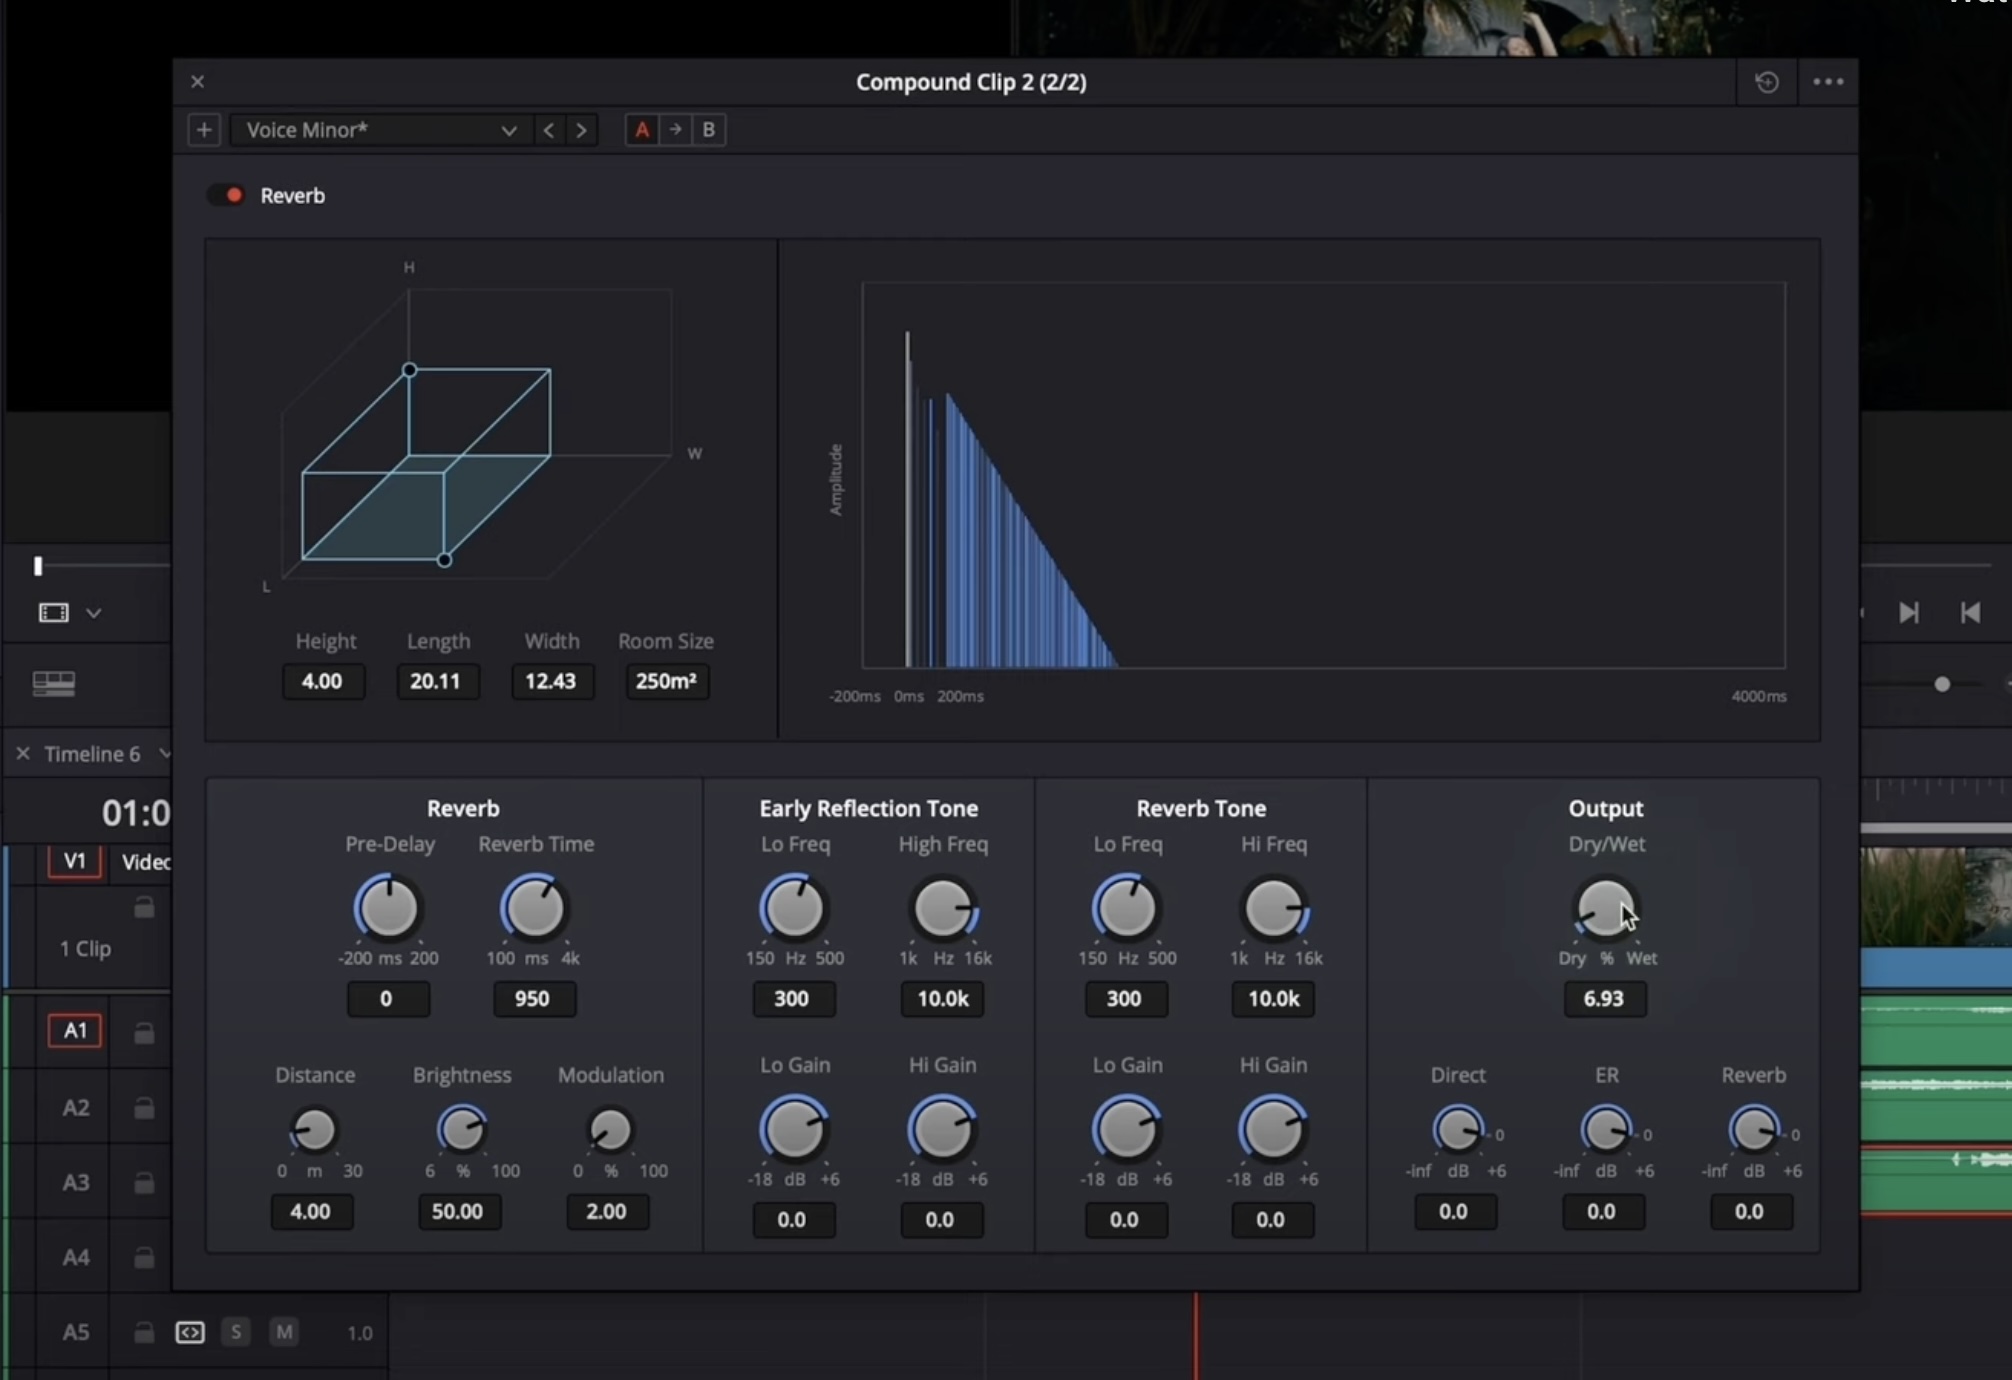 Screenshot of a reverb settings panel in a digital audio workstation (DAW). The panel includes controls for height, length, width, and room size, along with reverb time, early reflection tone, reverb tone, and output settings. Graphs show a 3D room visualization and an amplitude decay chart.